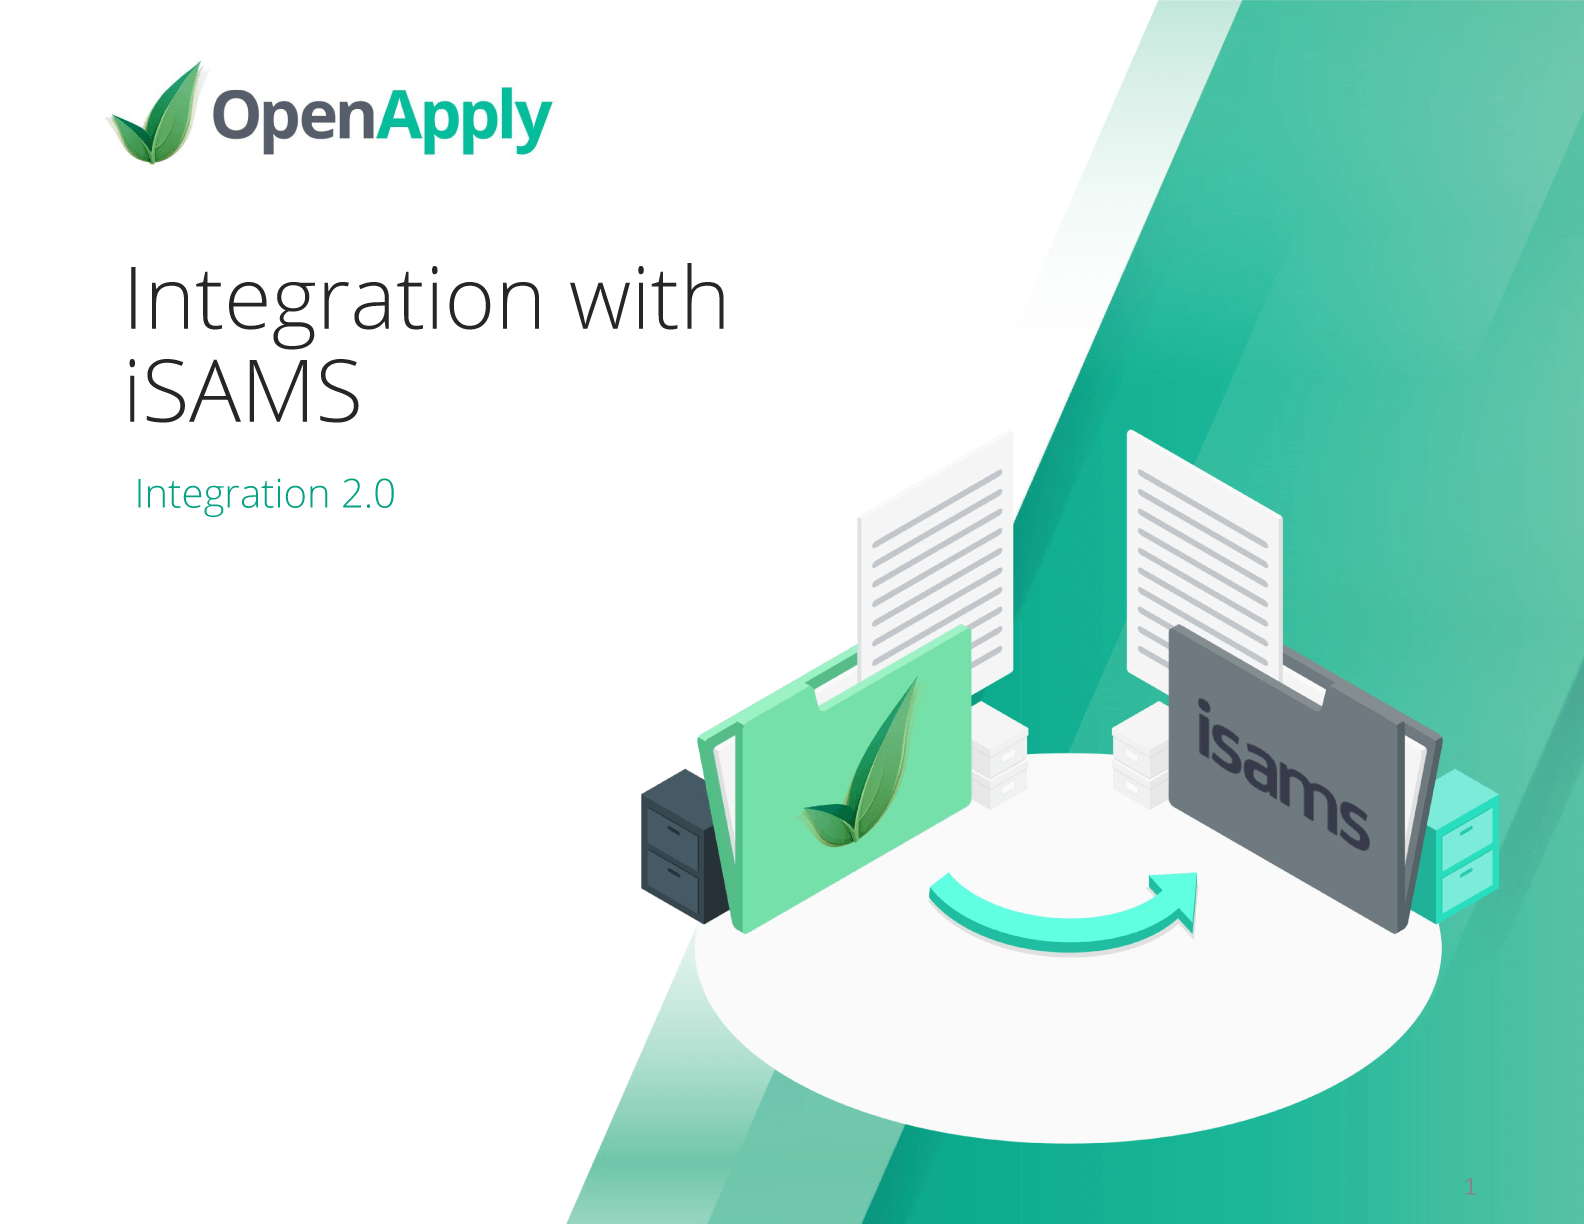 Guide to Integration with iSAMS